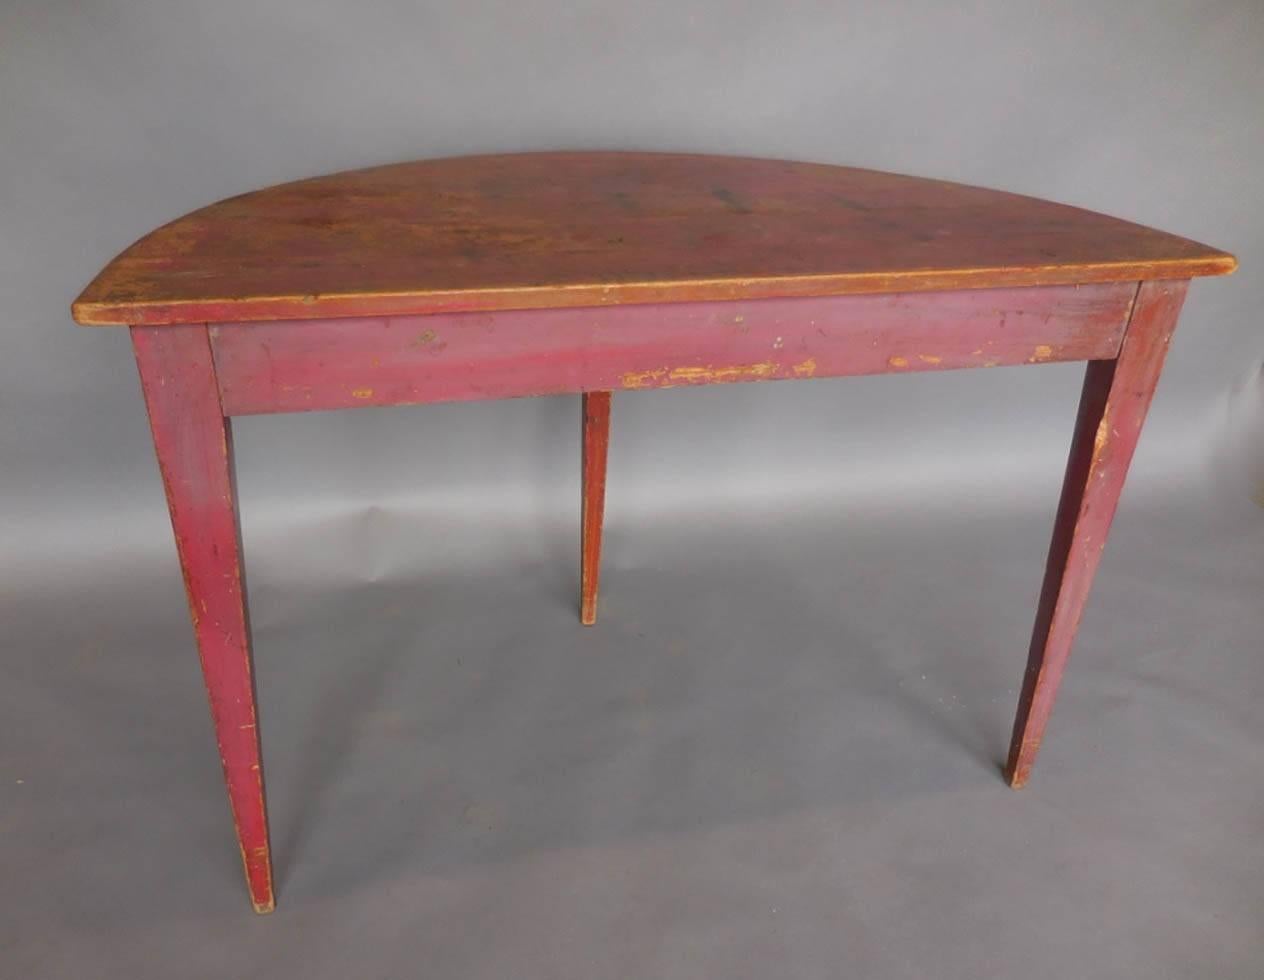 Late 19th century painted demilune table with tapered legs. Naturally worn patina throughout piece. Original wooden pegs